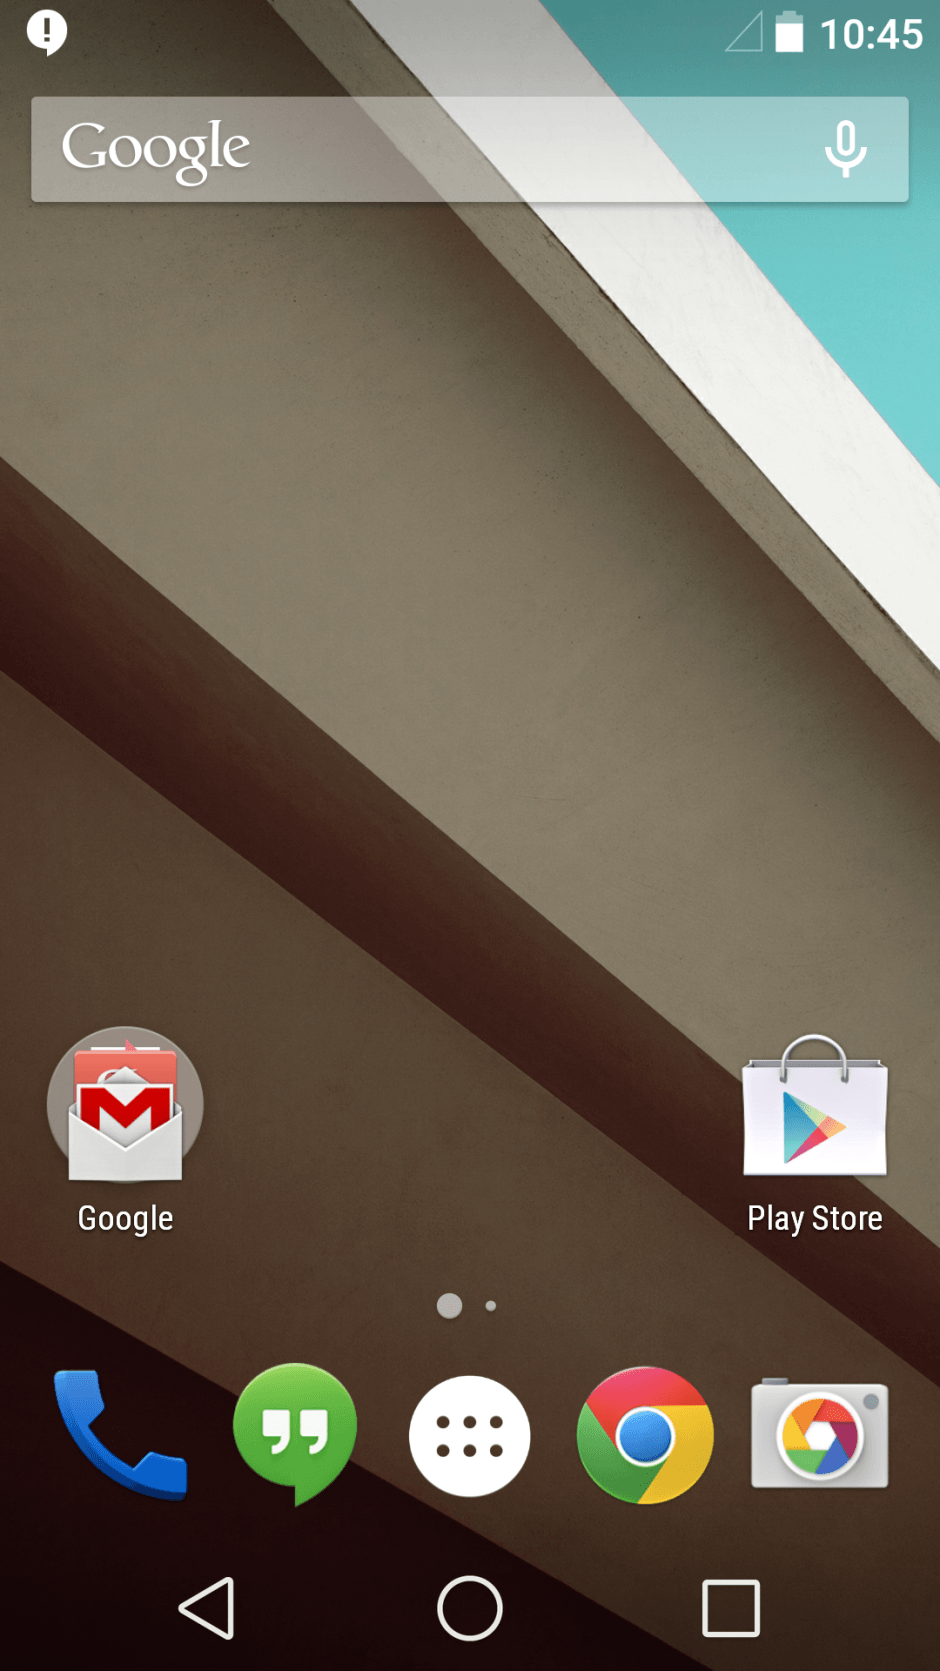 The homescreen remains largely unchanged